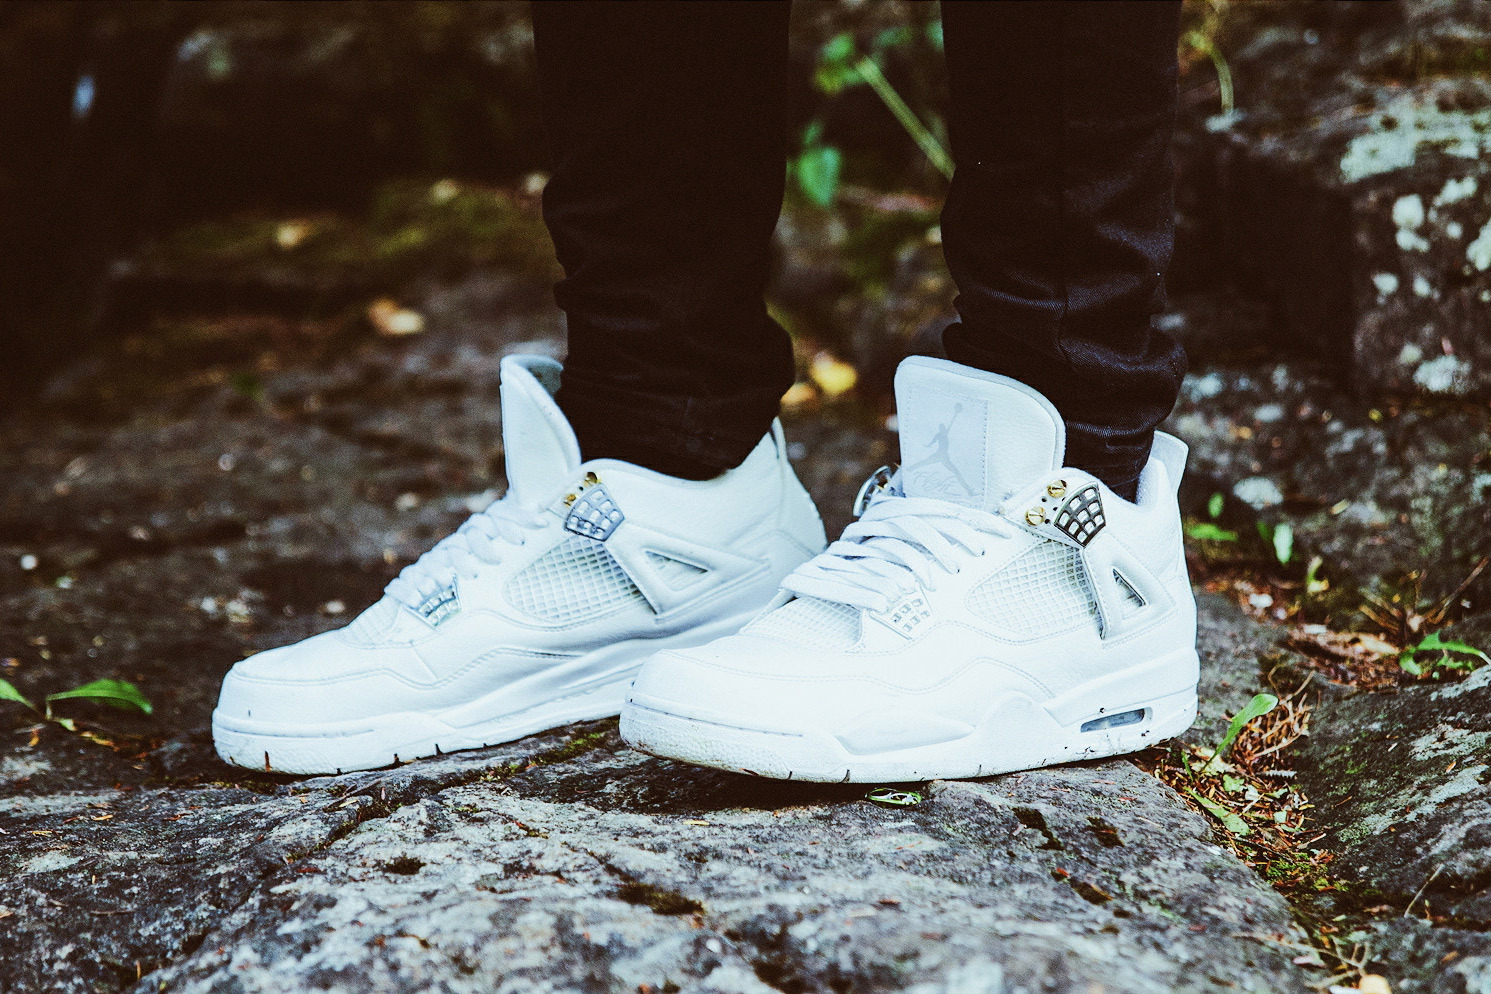 Luxurious and sophisticated with Air Jordan 4 "Pure Money"